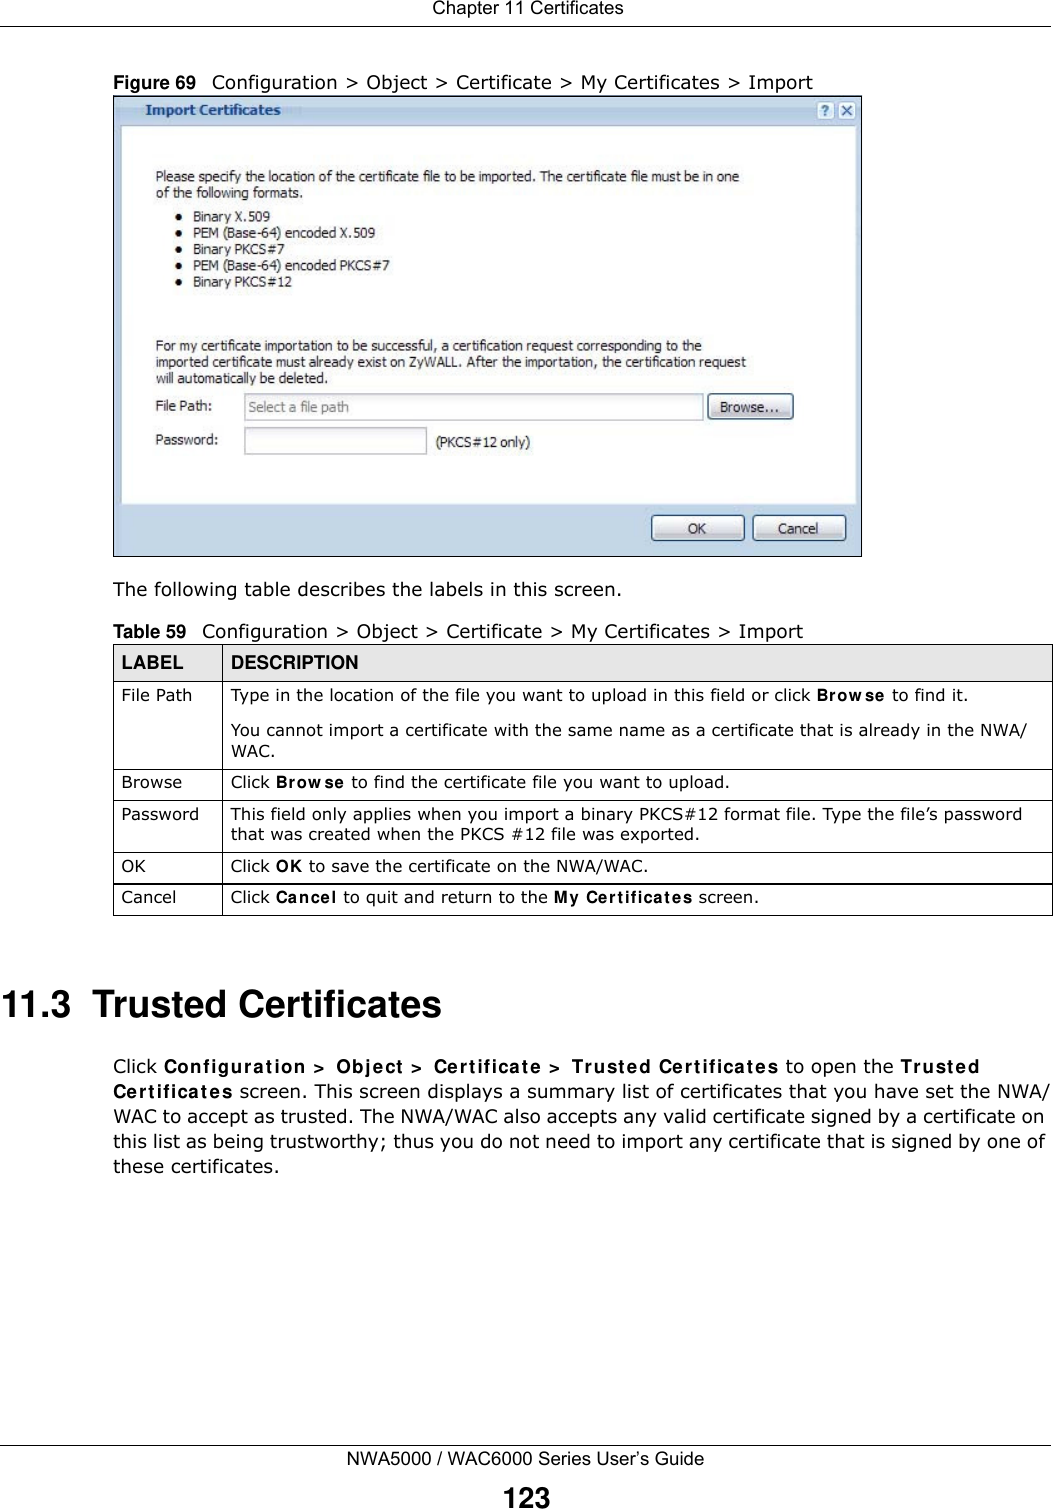  Chapter 11 CertificatesNWA5000 / WAC6000 Series User’s Guide123Figure 69   Configuration &gt; Object &gt; Certificate &gt; My Certificates &gt; ImportThe following table describes the labels in this screen.  11.3  Trusted CertificatesClick Configuration &gt; Object &gt; Certificate &gt; Trusted Certificates to open the Trusted Certificates screen. This screen displays a summary list of certificates that you have set the NWA/WAC to accept as trusted. The NWA/WAC also accepts any valid certificate signed by a certificate on this list as being trustworthy; thus you do not need to import any certificate that is signed by one of these certificates. Table 59   Configuration &gt; Object &gt; Certificate &gt; My Certificates &gt; ImportLABEL DESCRIPTIONFile Path  Type in the location of the file you want to upload in this field or click Browse to find it.You cannot import a certificate with the same name as a certificate that is already in the NWA/WAC.Browse Click Browse to find the certificate file you want to upload. Password This field only applies when you import a binary PKCS#12 format file. Type the file’s password that was created when the PKCS #12 file was exported. OK Click OK to save the certificate on the NWA/WAC.Cancel Click Cancel to quit and return to the My Certificates screen.